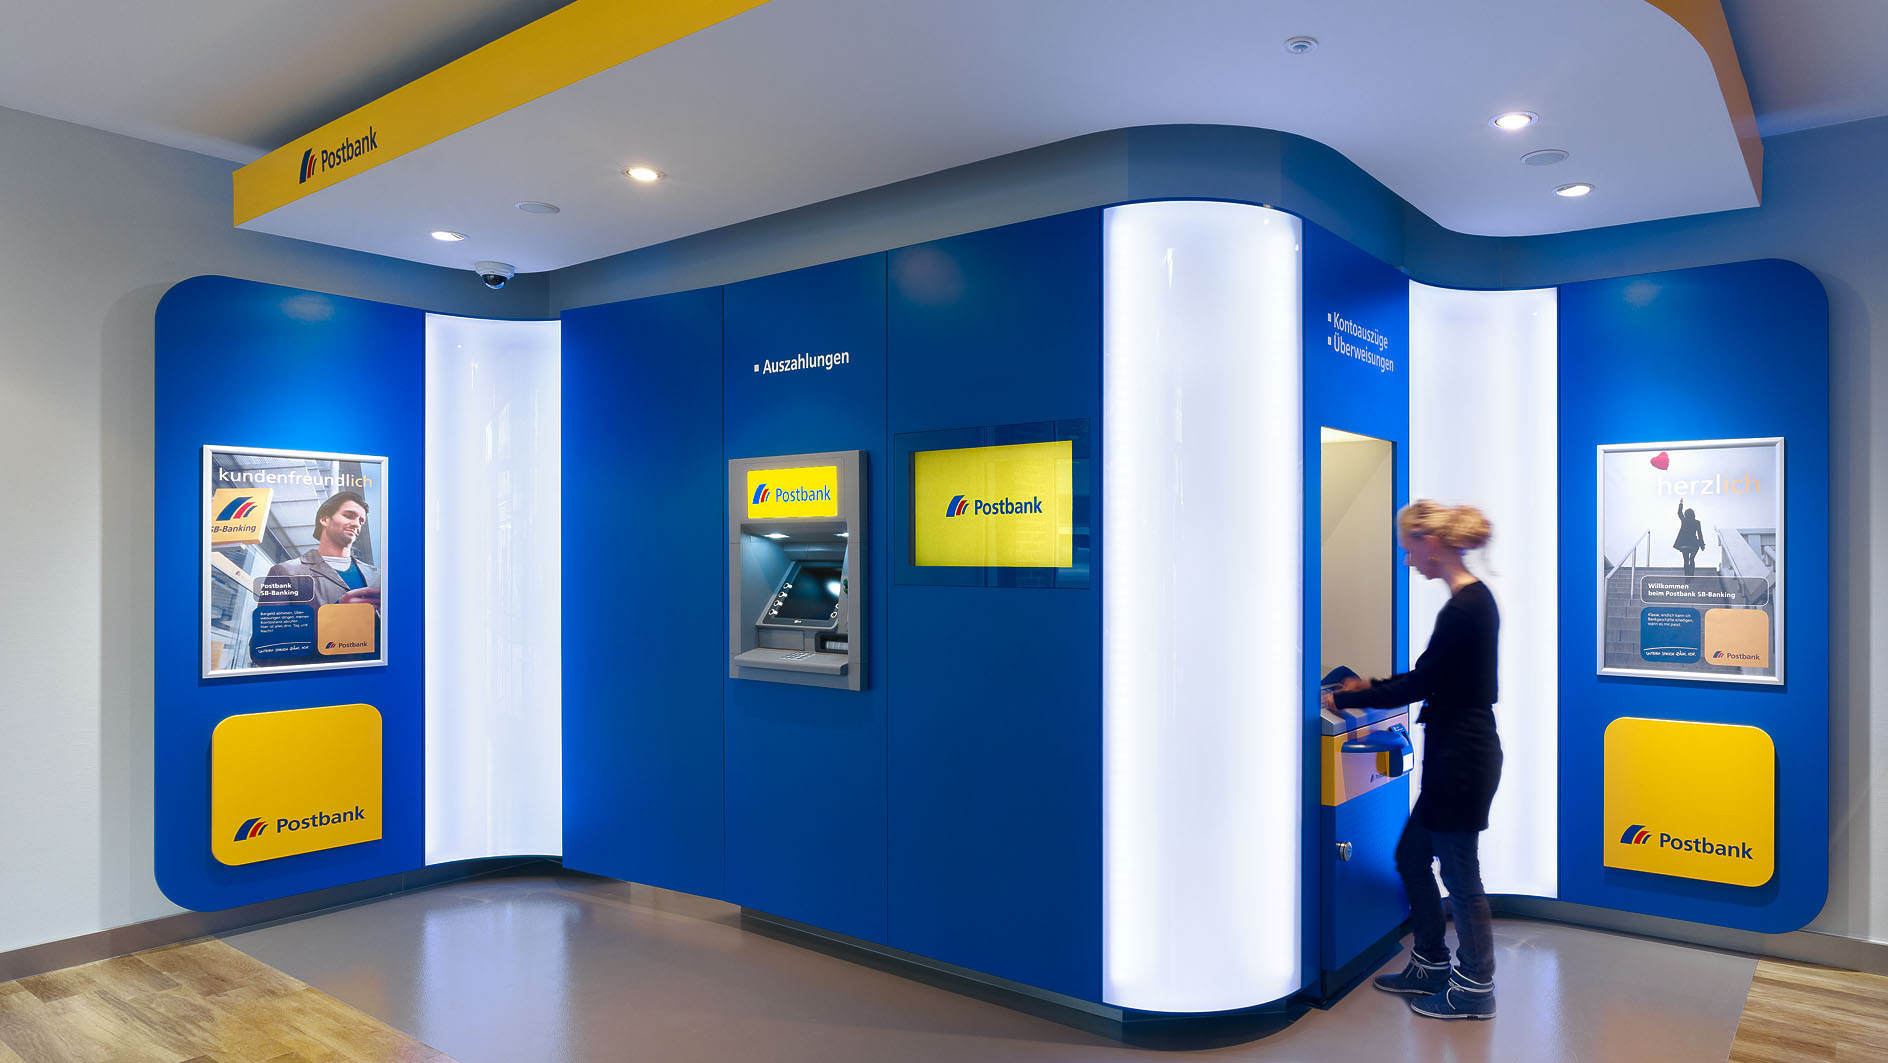 Interior of the branch with illuminated interior. Customer is at the ATM